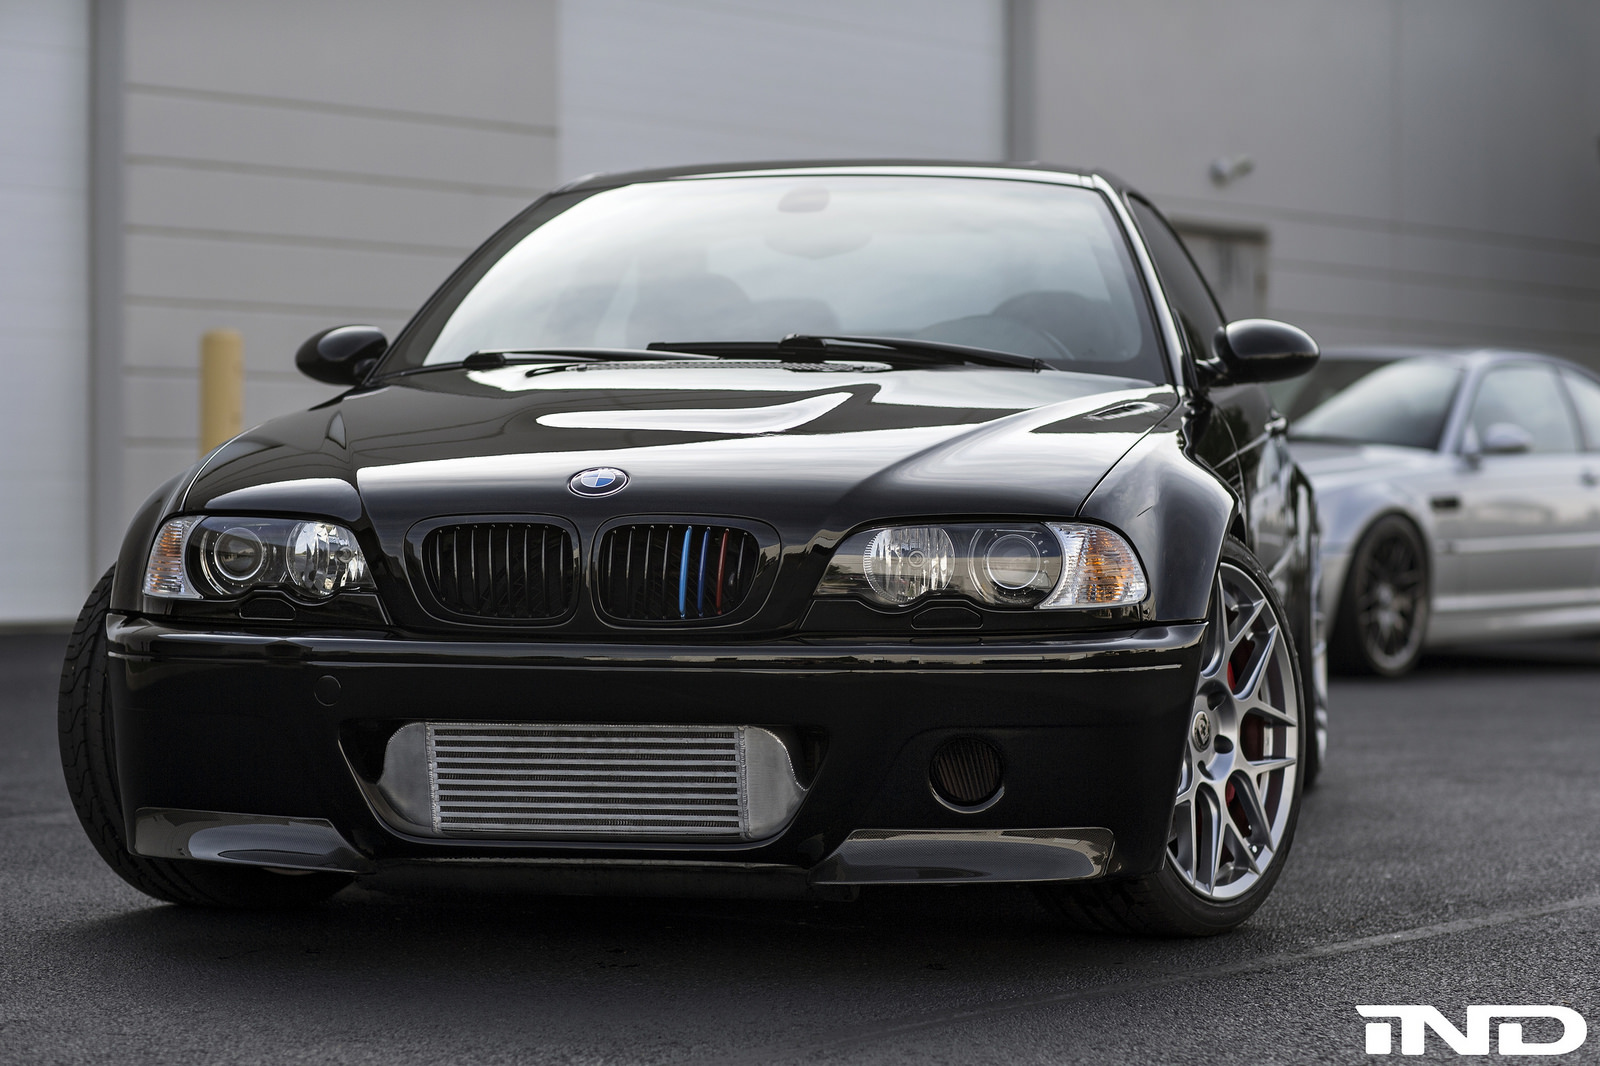 Pristine Supercharged BMW E36 M3 Build By IND 1